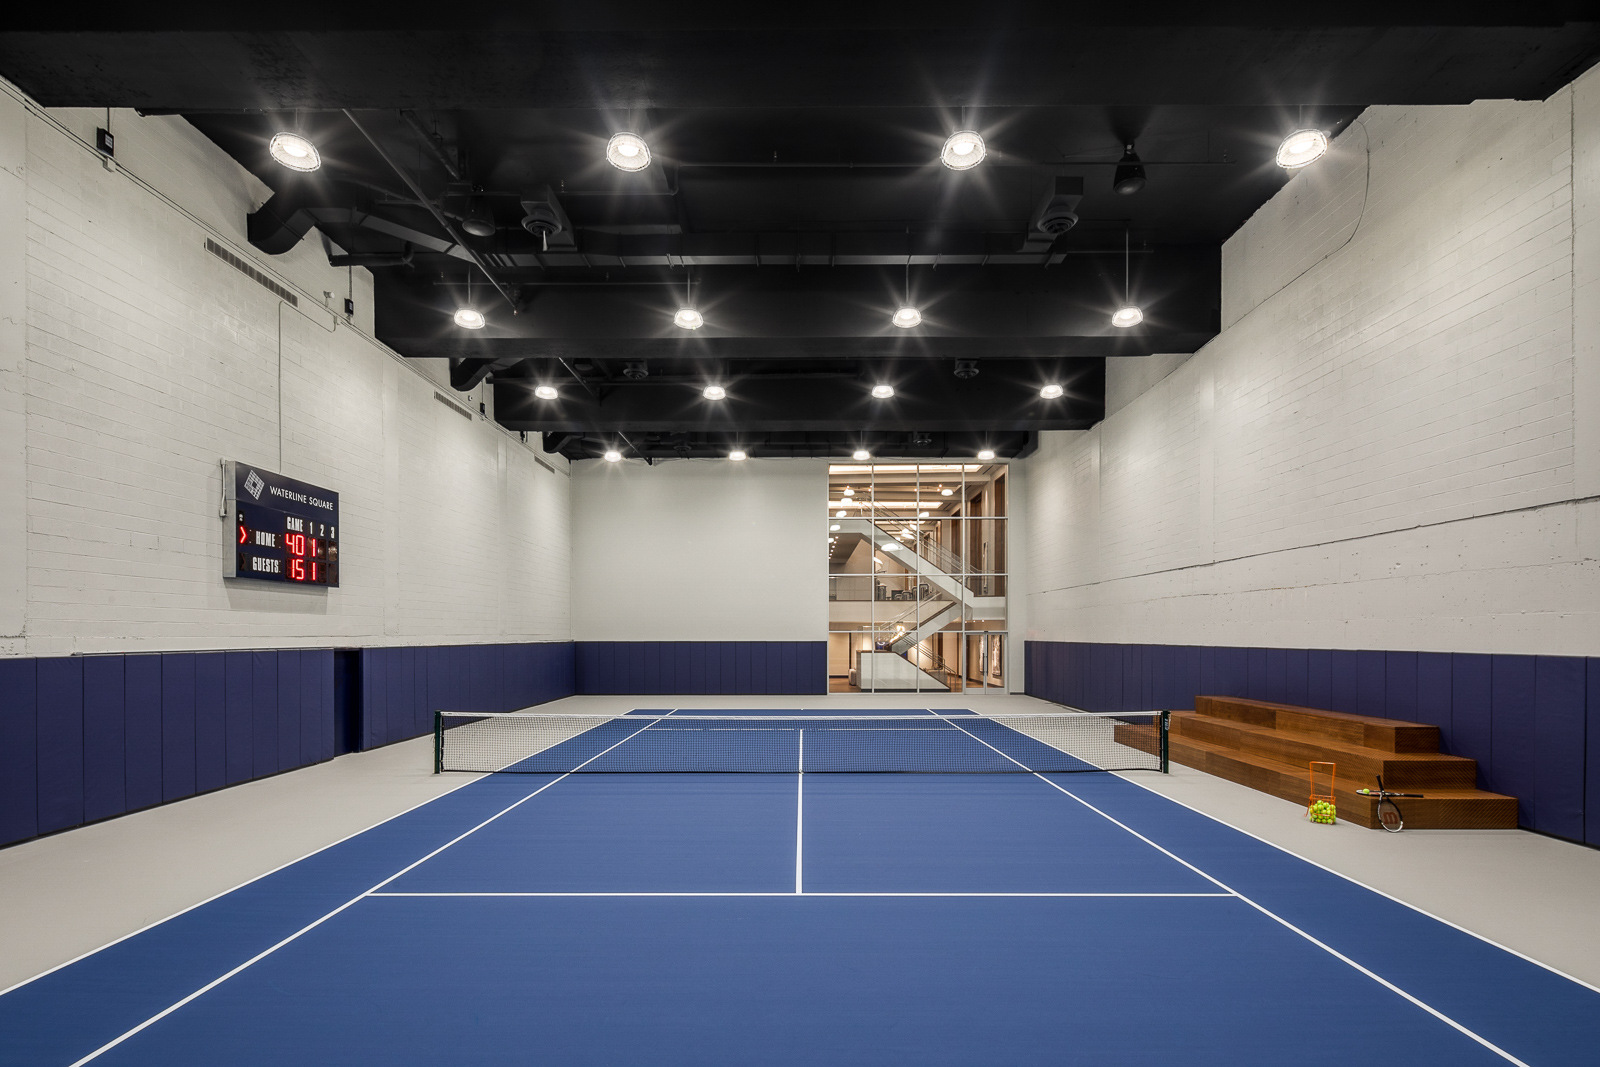 A spacious indoor tennis court with blue flooring, white walls, and elevated spectator seating area, featuring a stairway in the background leading to additional levels.